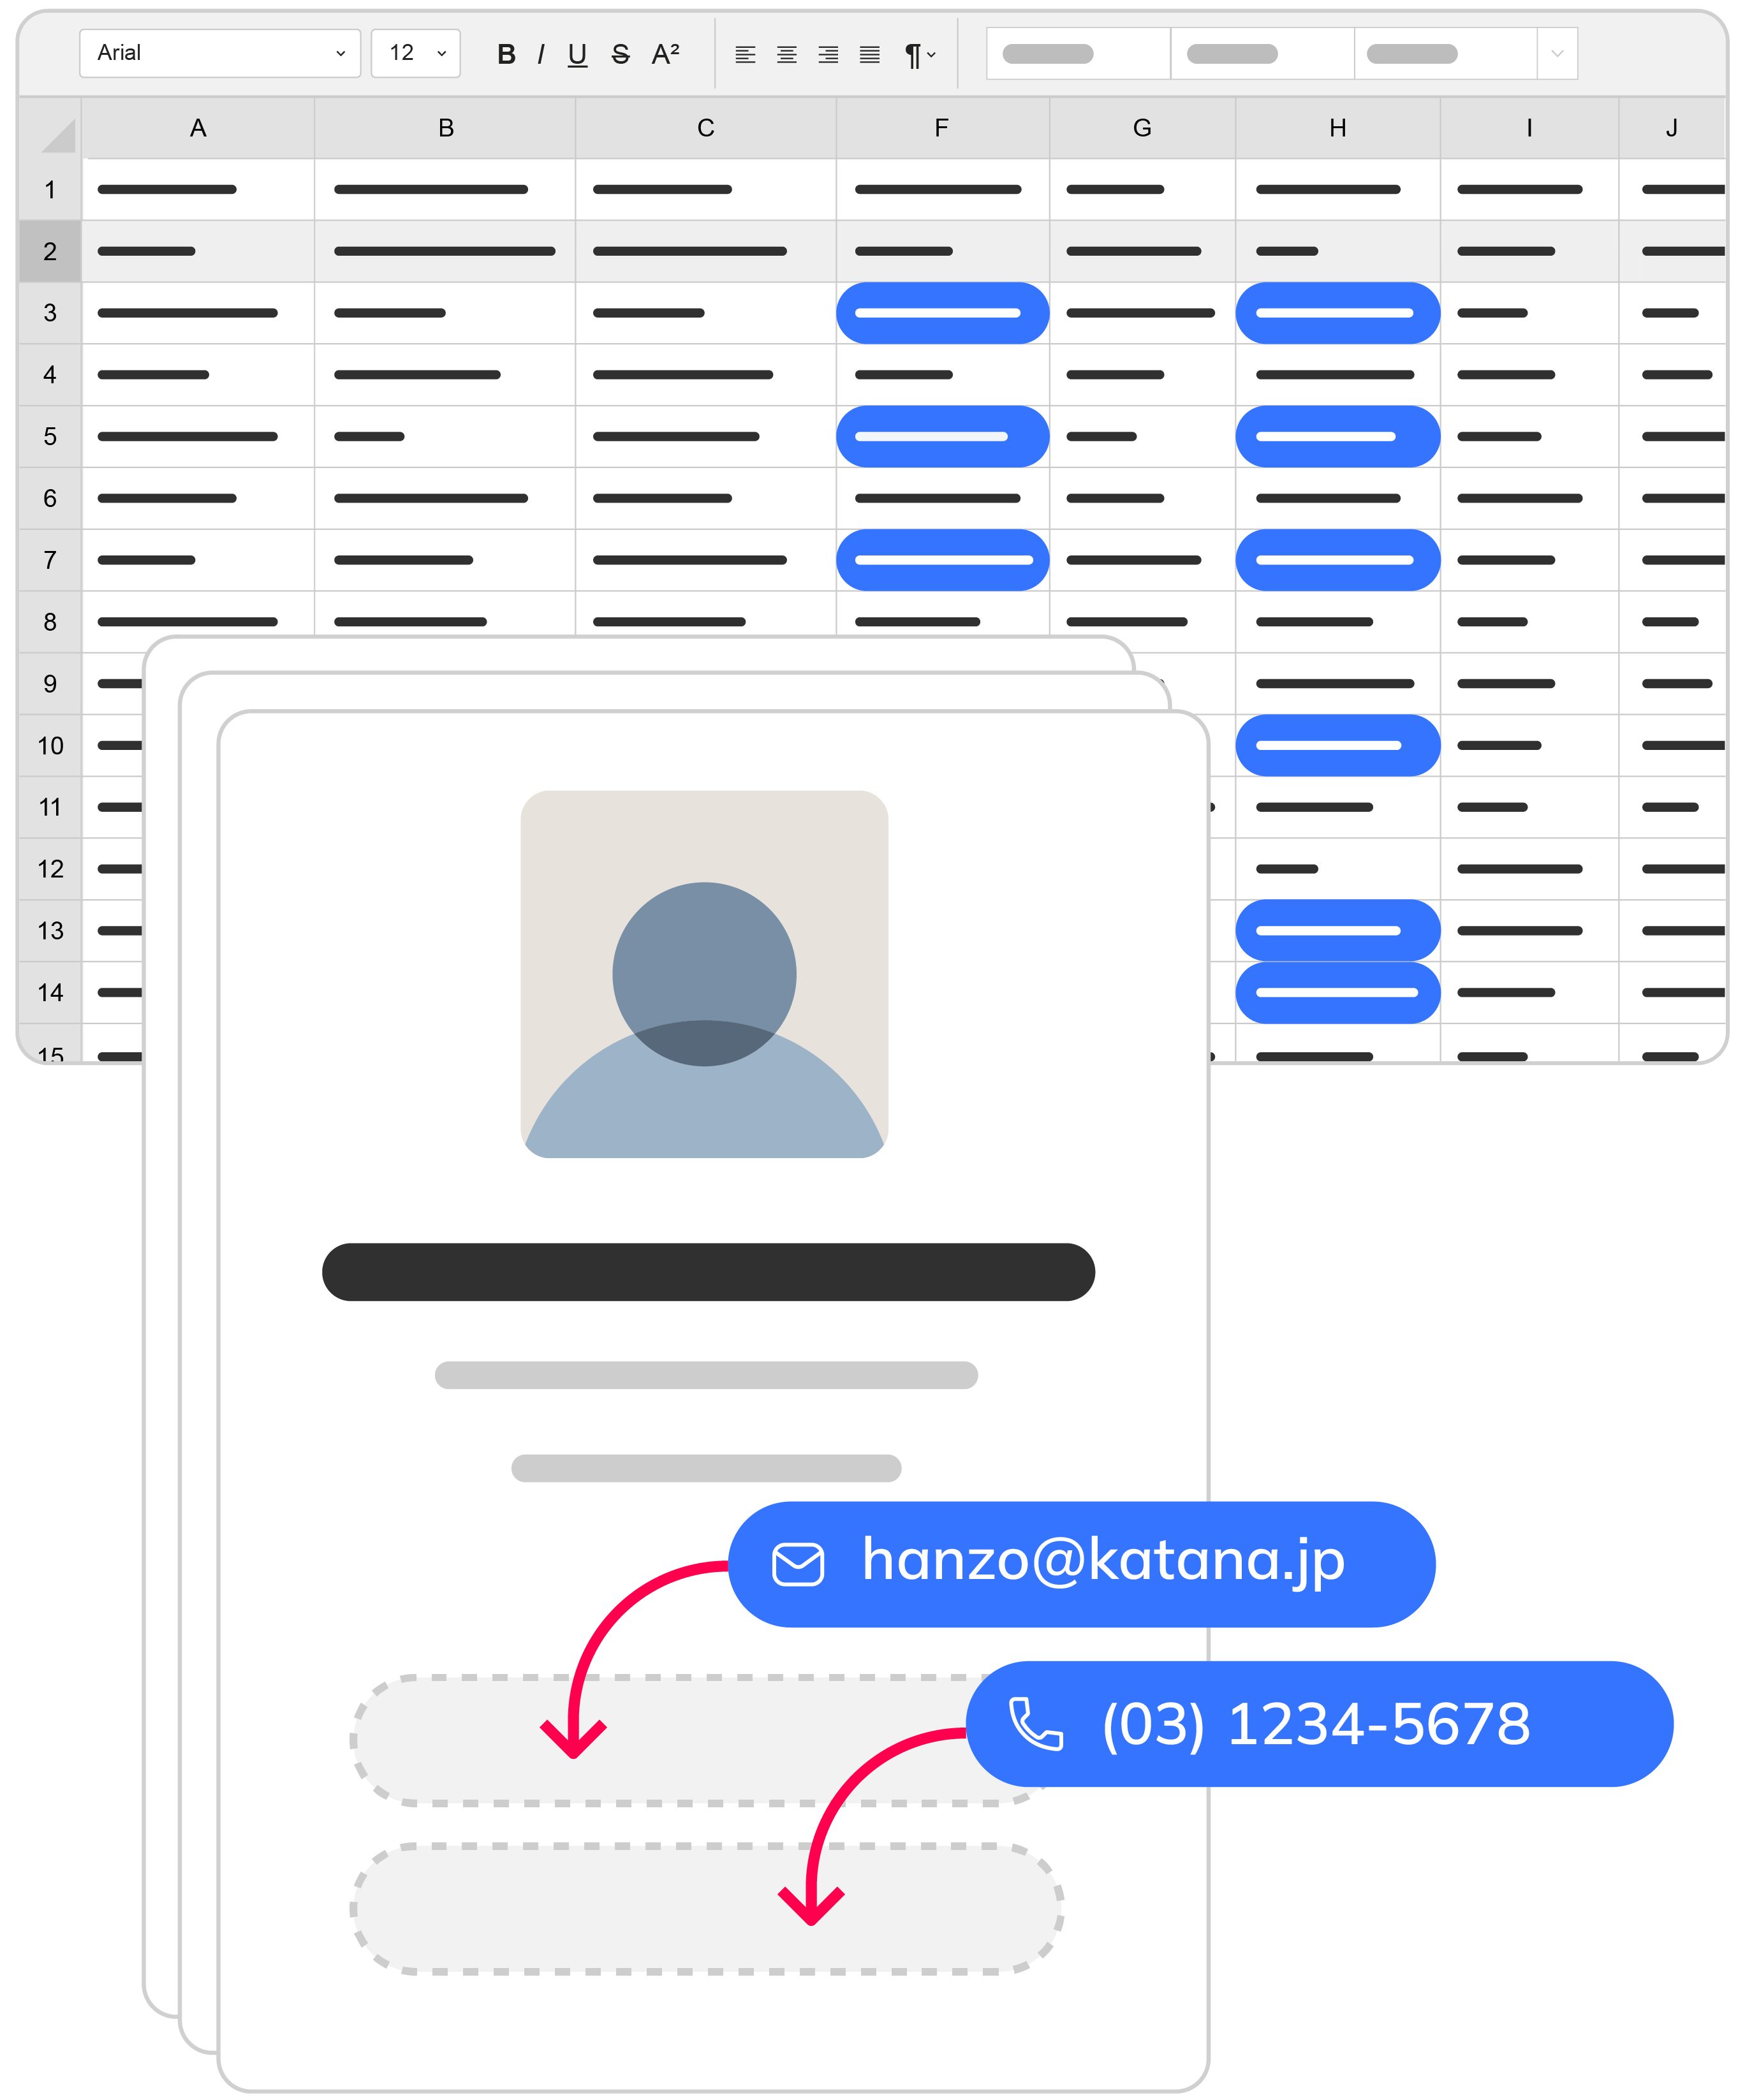 Kanbox - Missing email and phone number enrichment